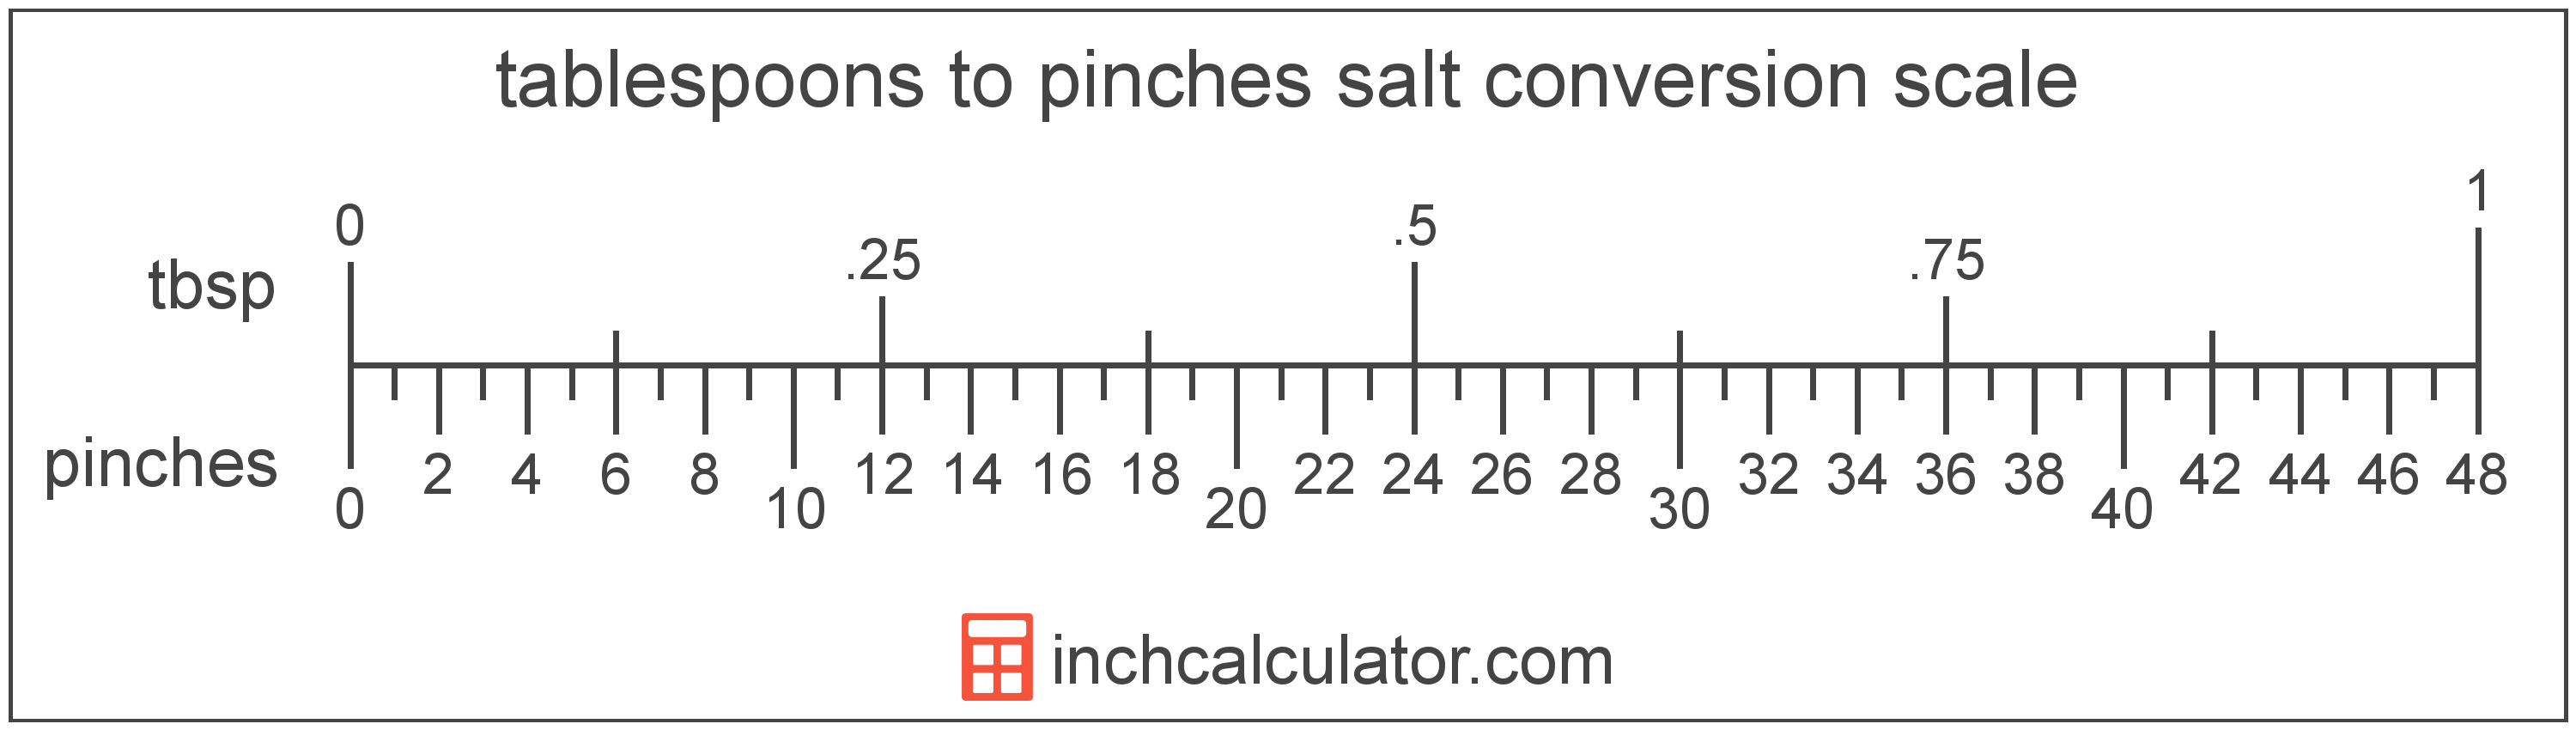 conversion scale showing pinches and equivalent tablespoons salt volume values